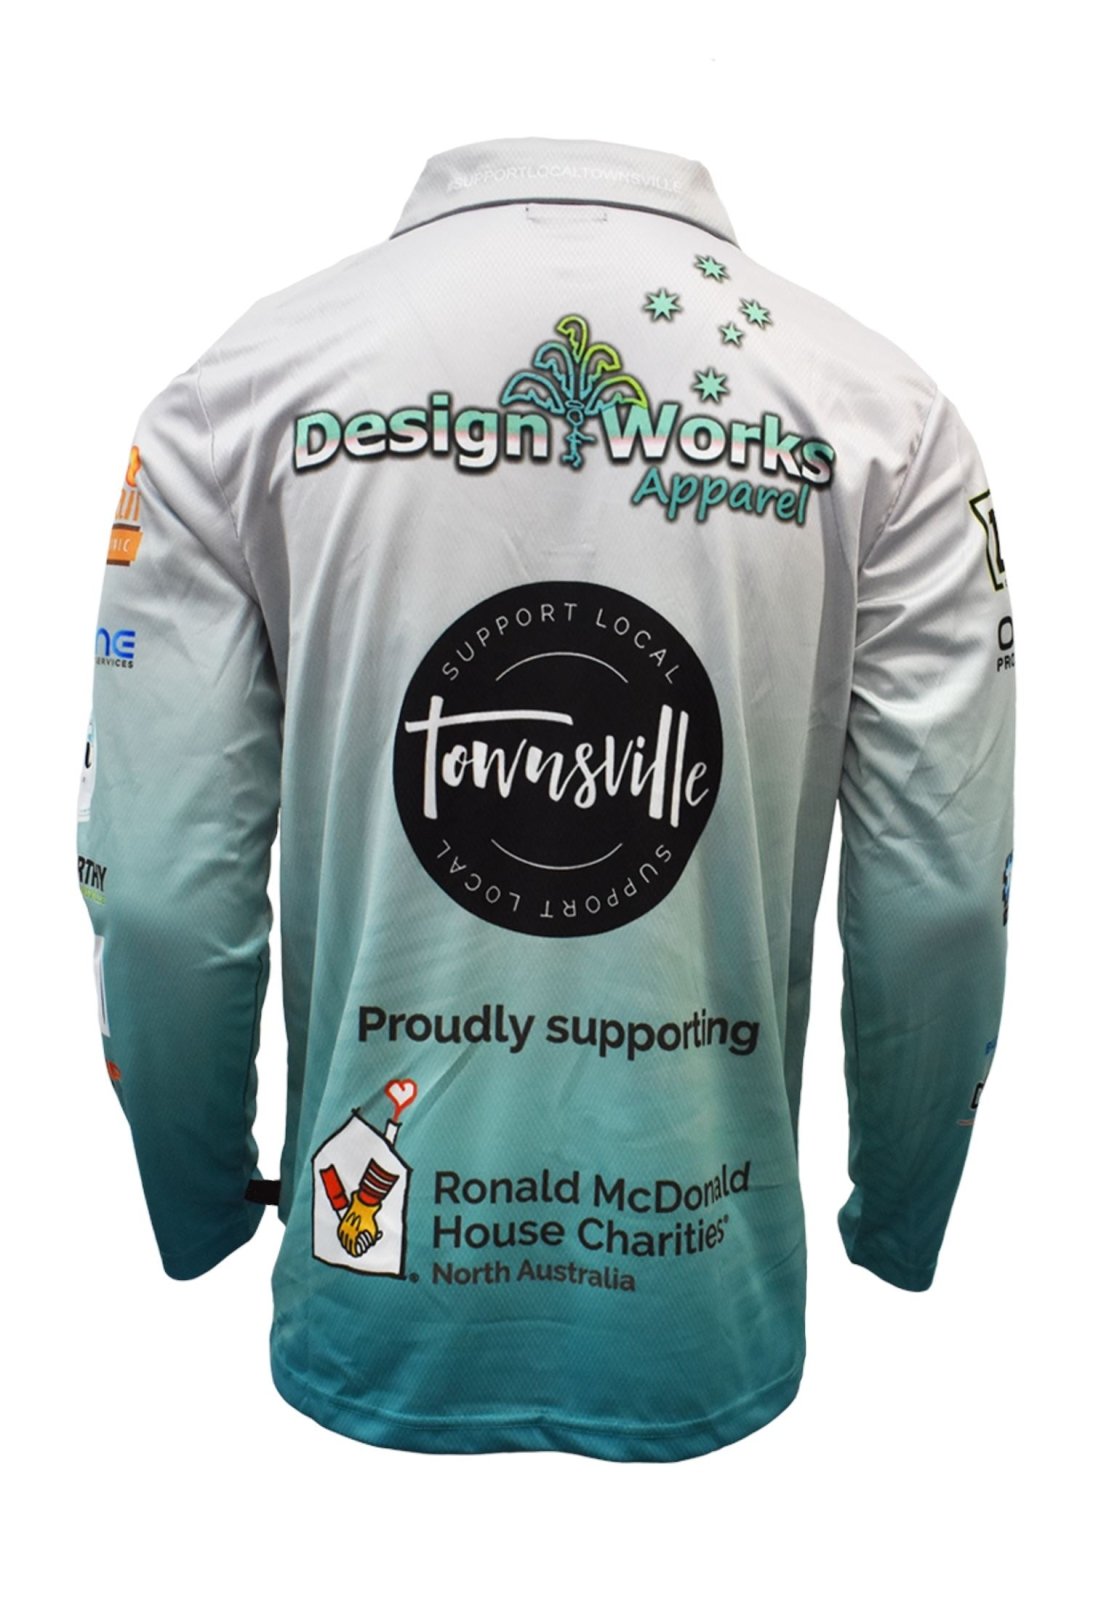 Adult L/S - Support Local Townsville - Design Works Apparel